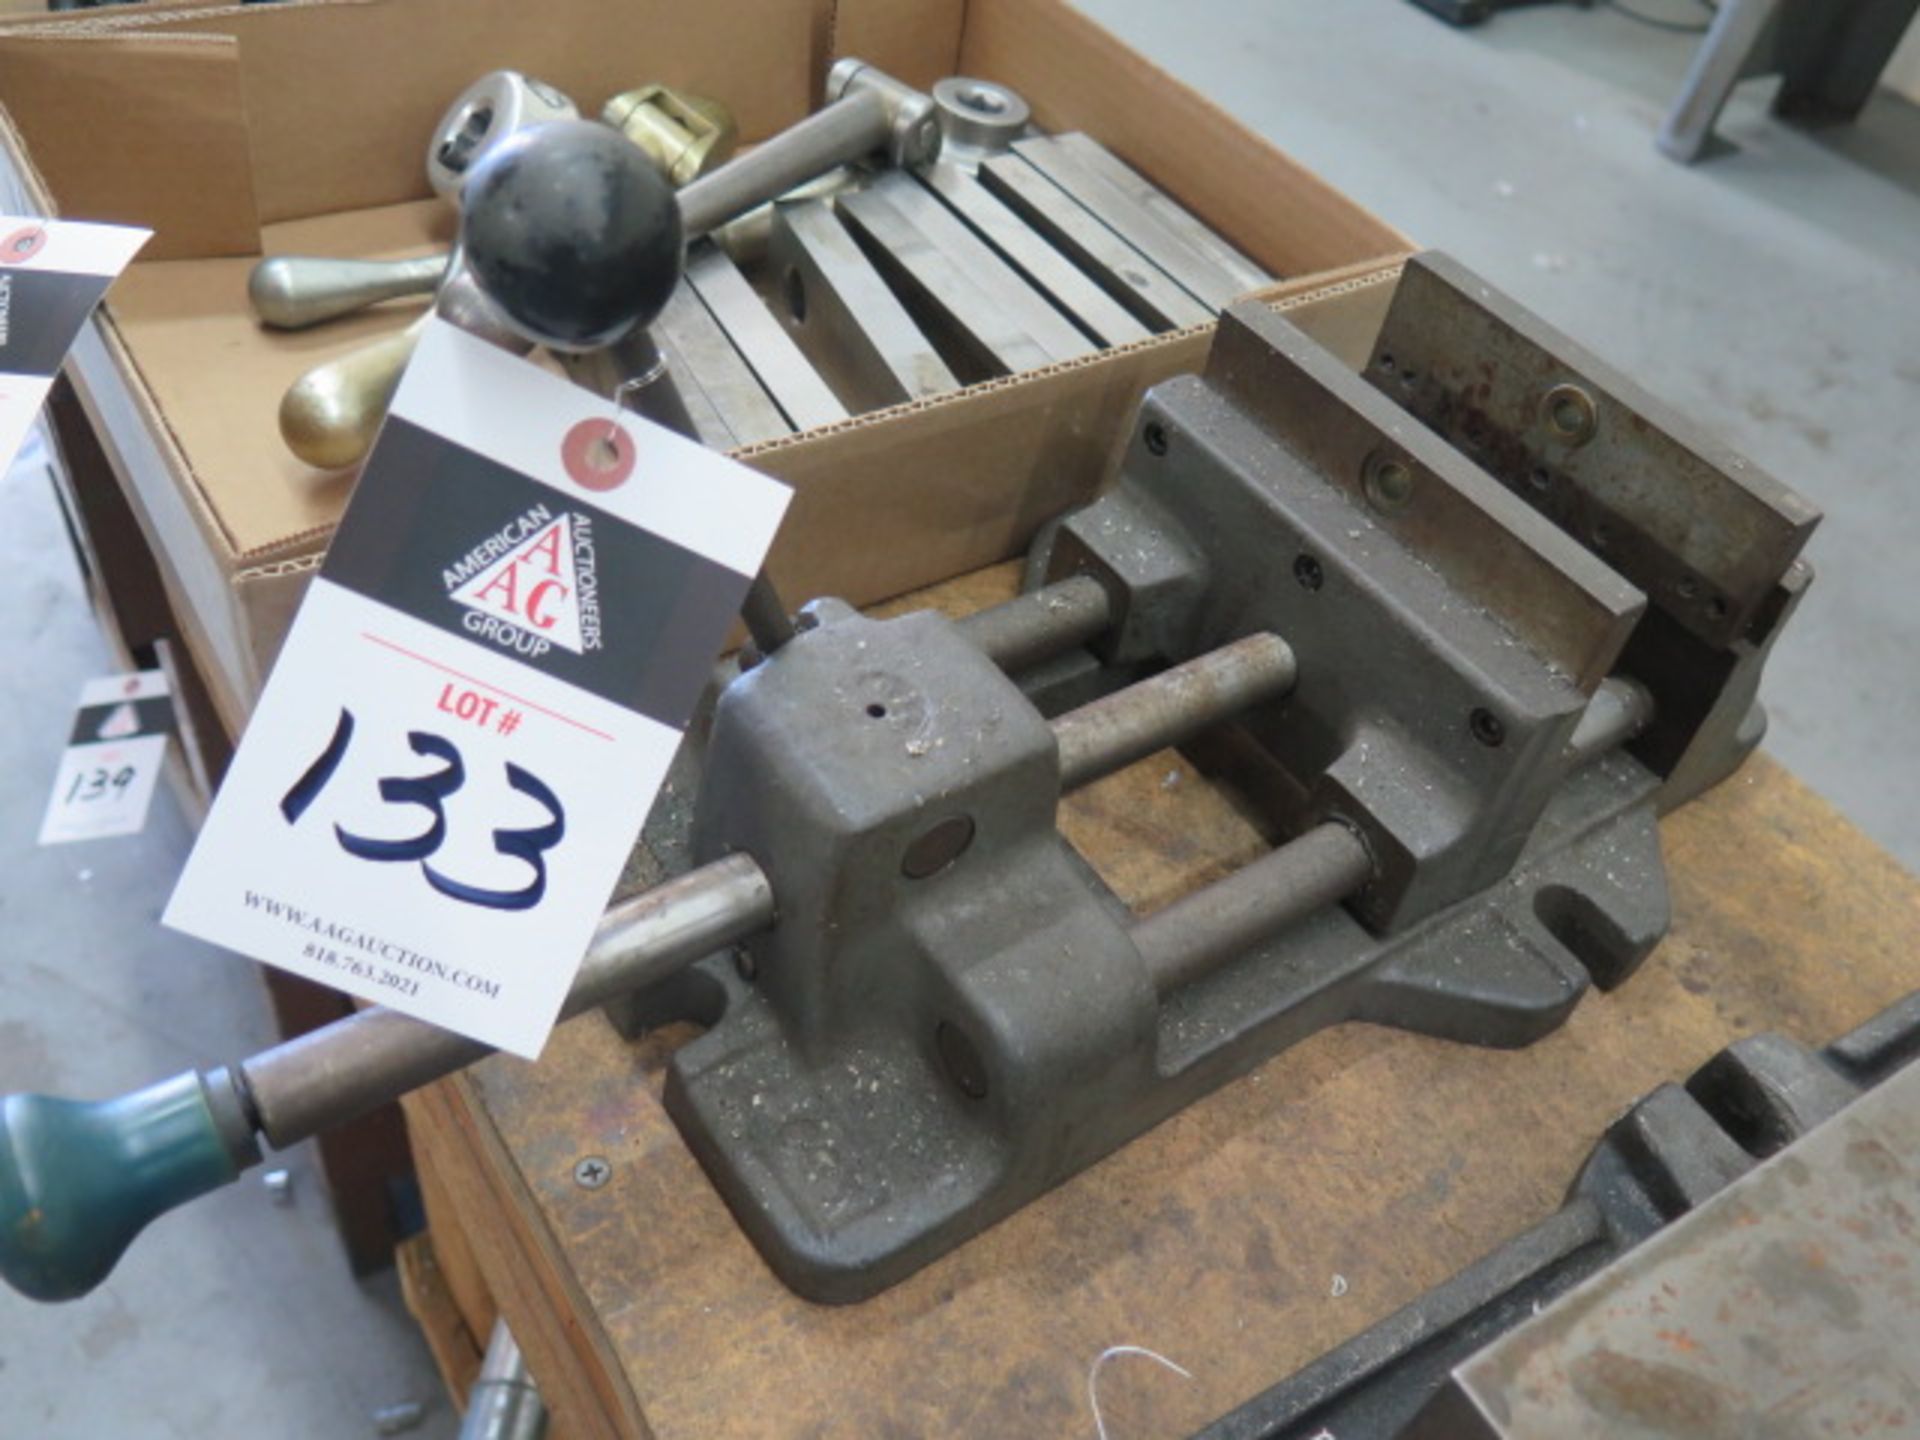 6" Speed Vise (SOLD AS-IS - NO WARRANTY)